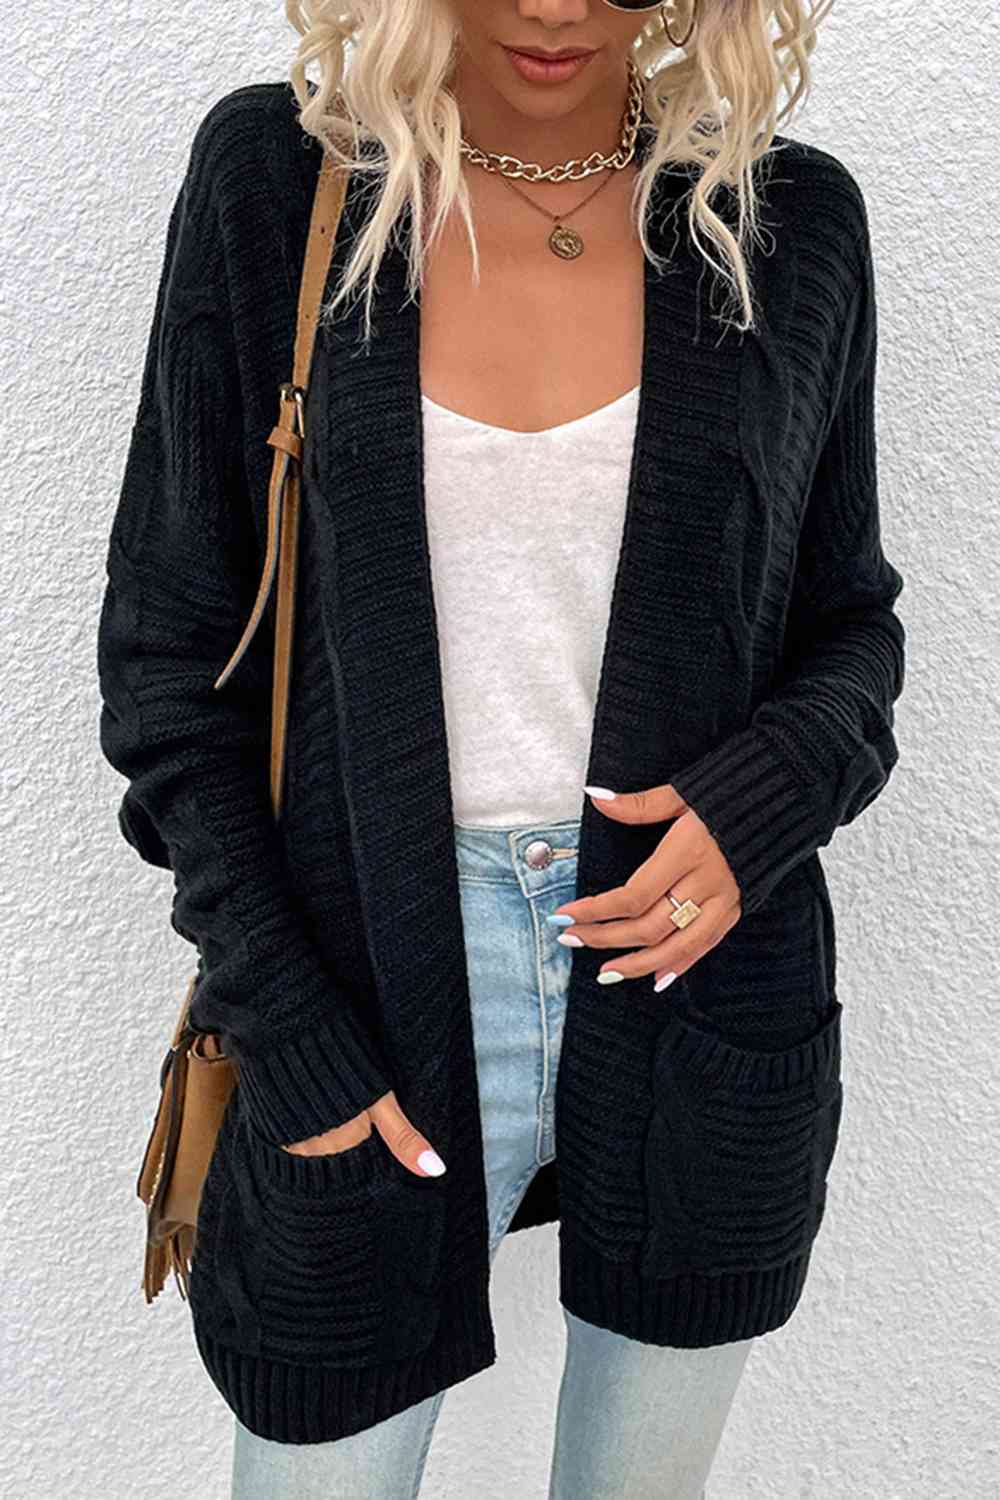 Not Alone Cardigan - Cheeky Chic Boutique